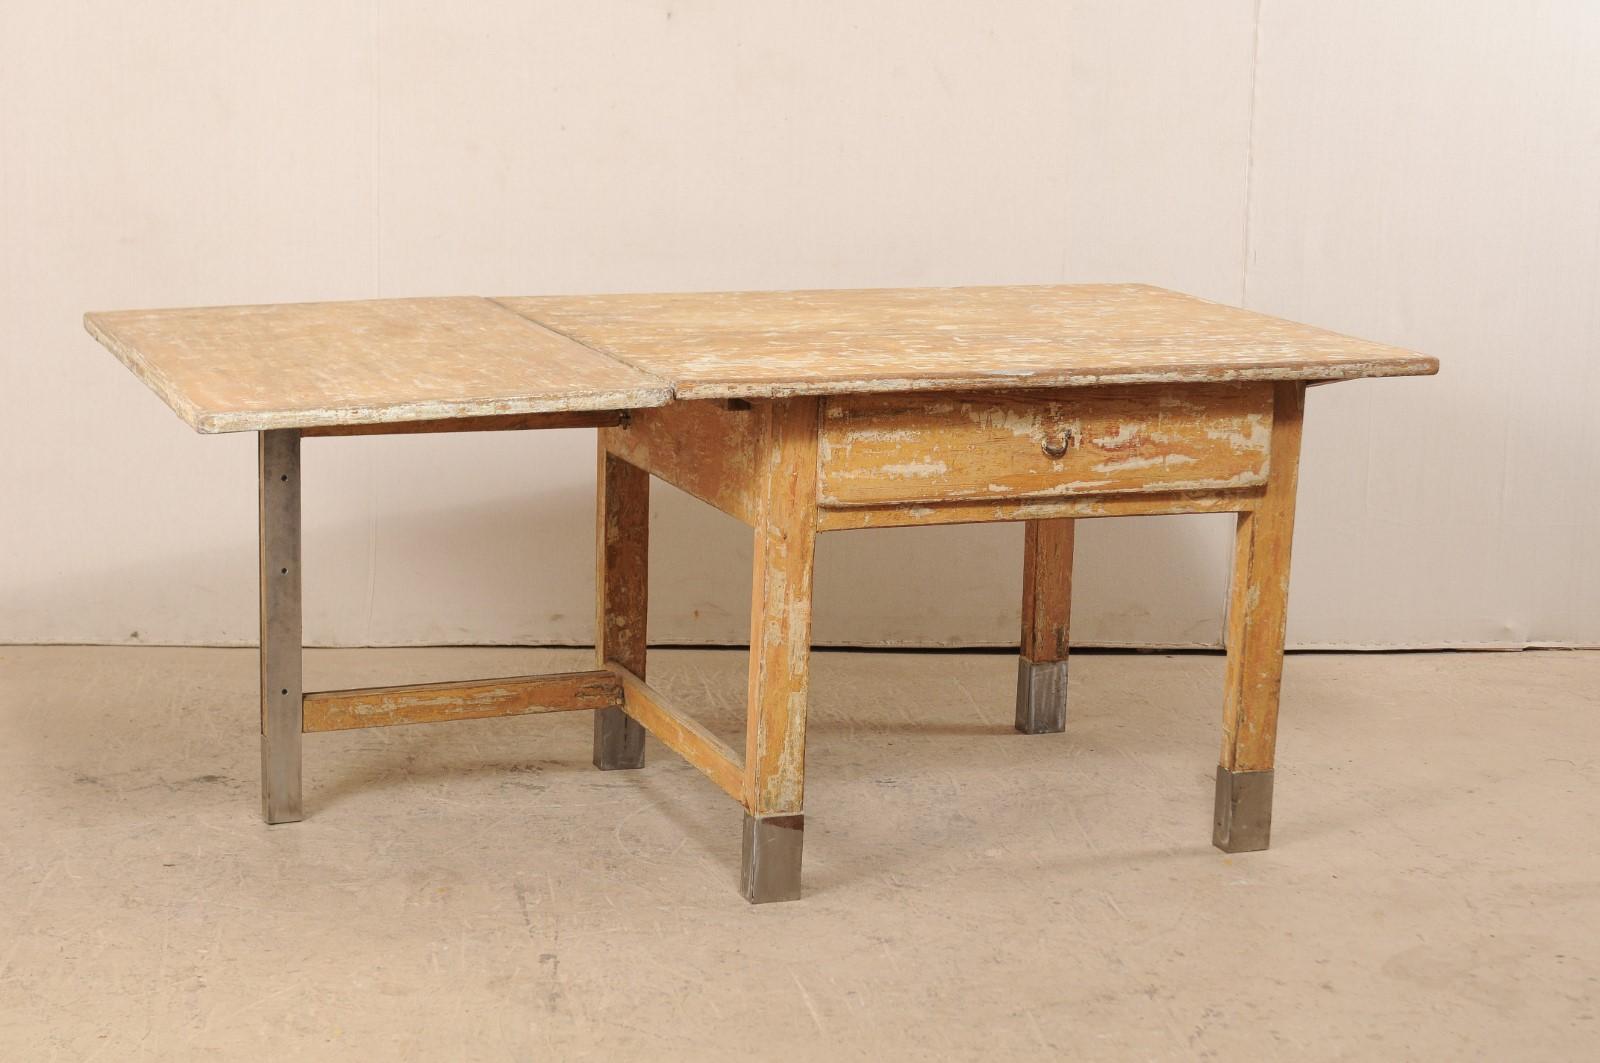 19th Century Swedish 19th C. Drop-Leaf & Gate-Leg Table w/New Modern Feet- Great for Kitchen! For Sale